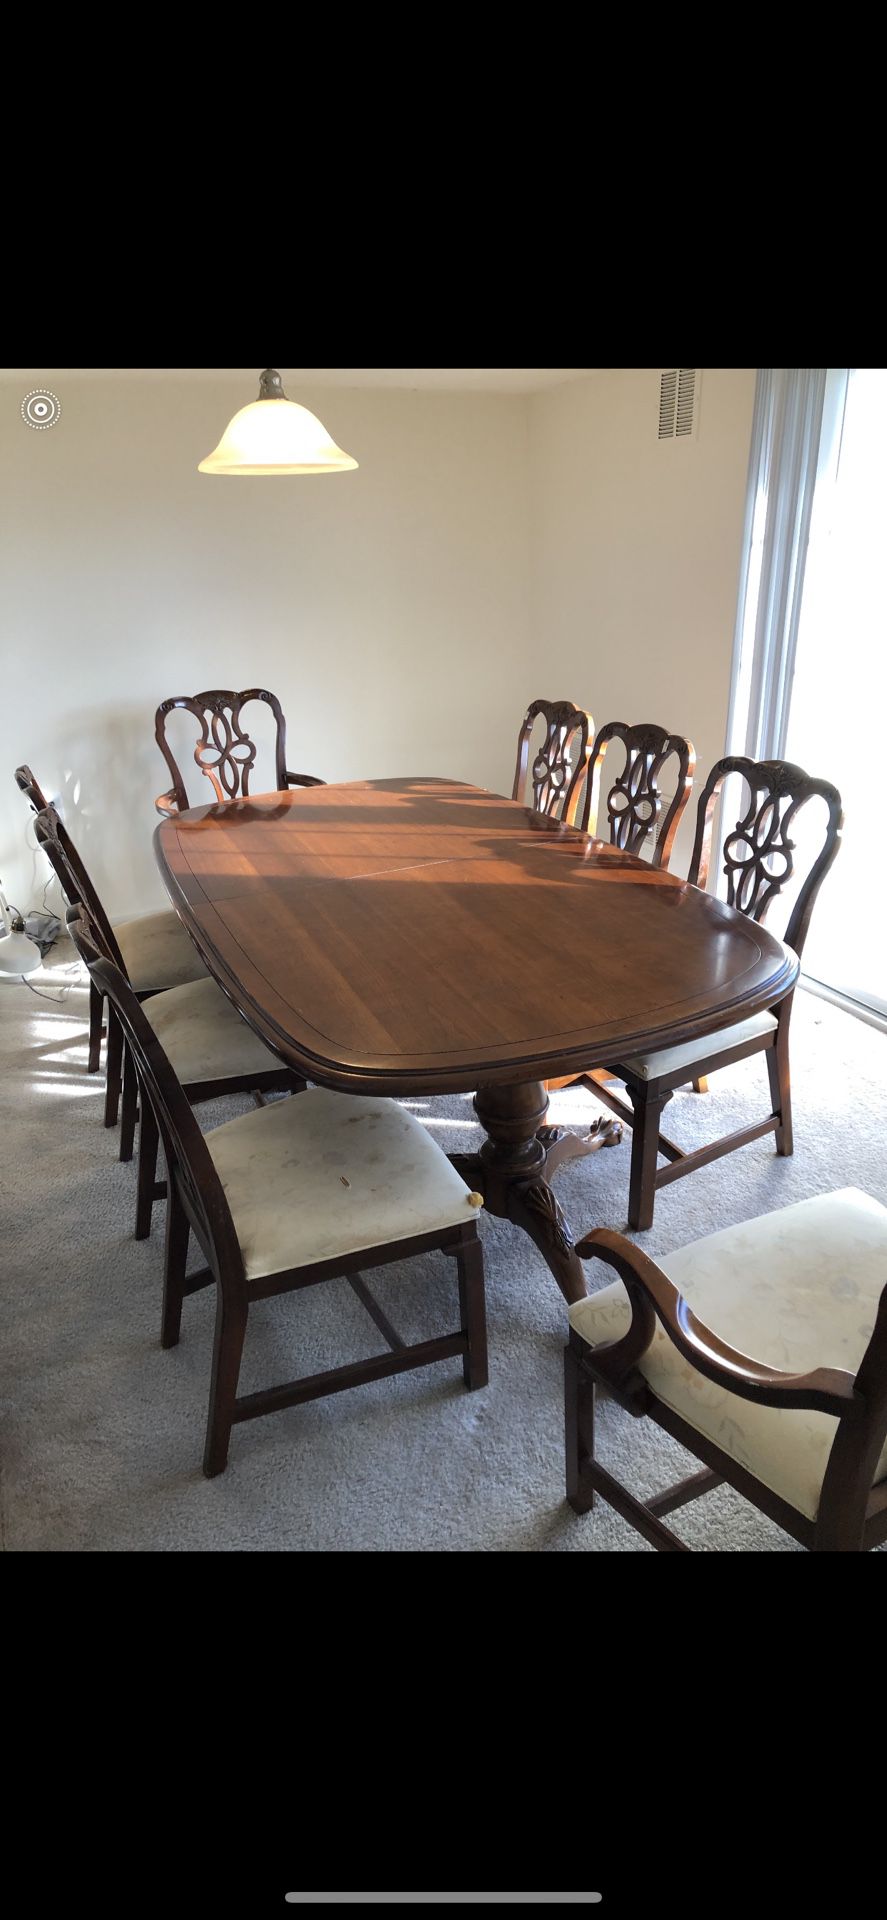 Century dinning room set (table and chairs)